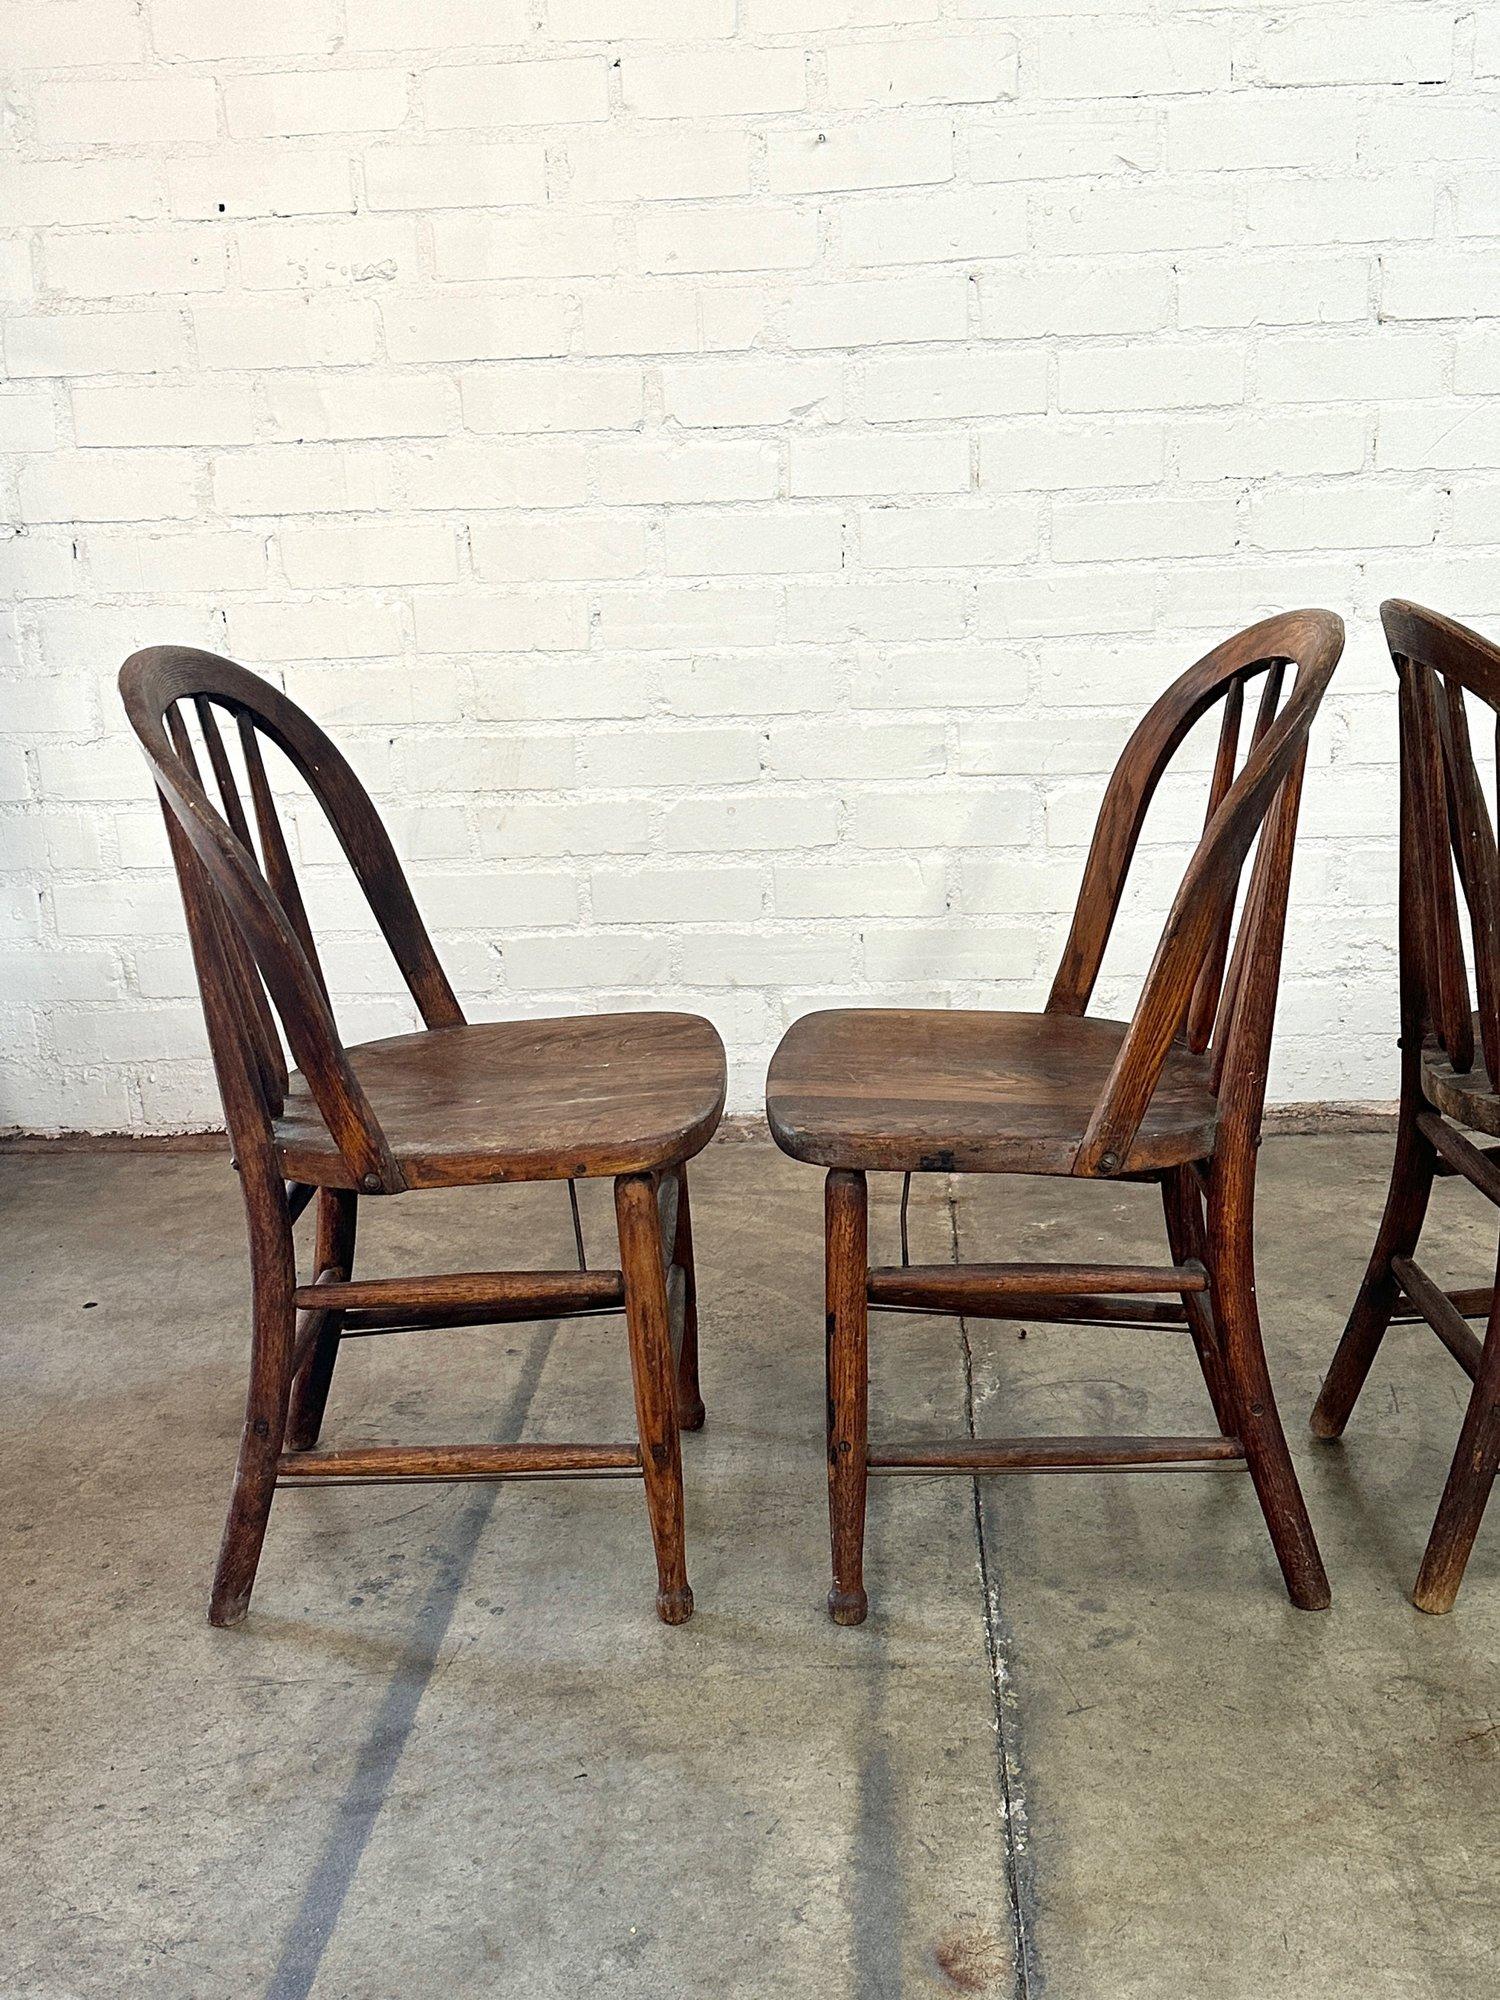 Mid-20th Century Vintage Farmhouse Spindle Chairs- Set of 4 For Sale